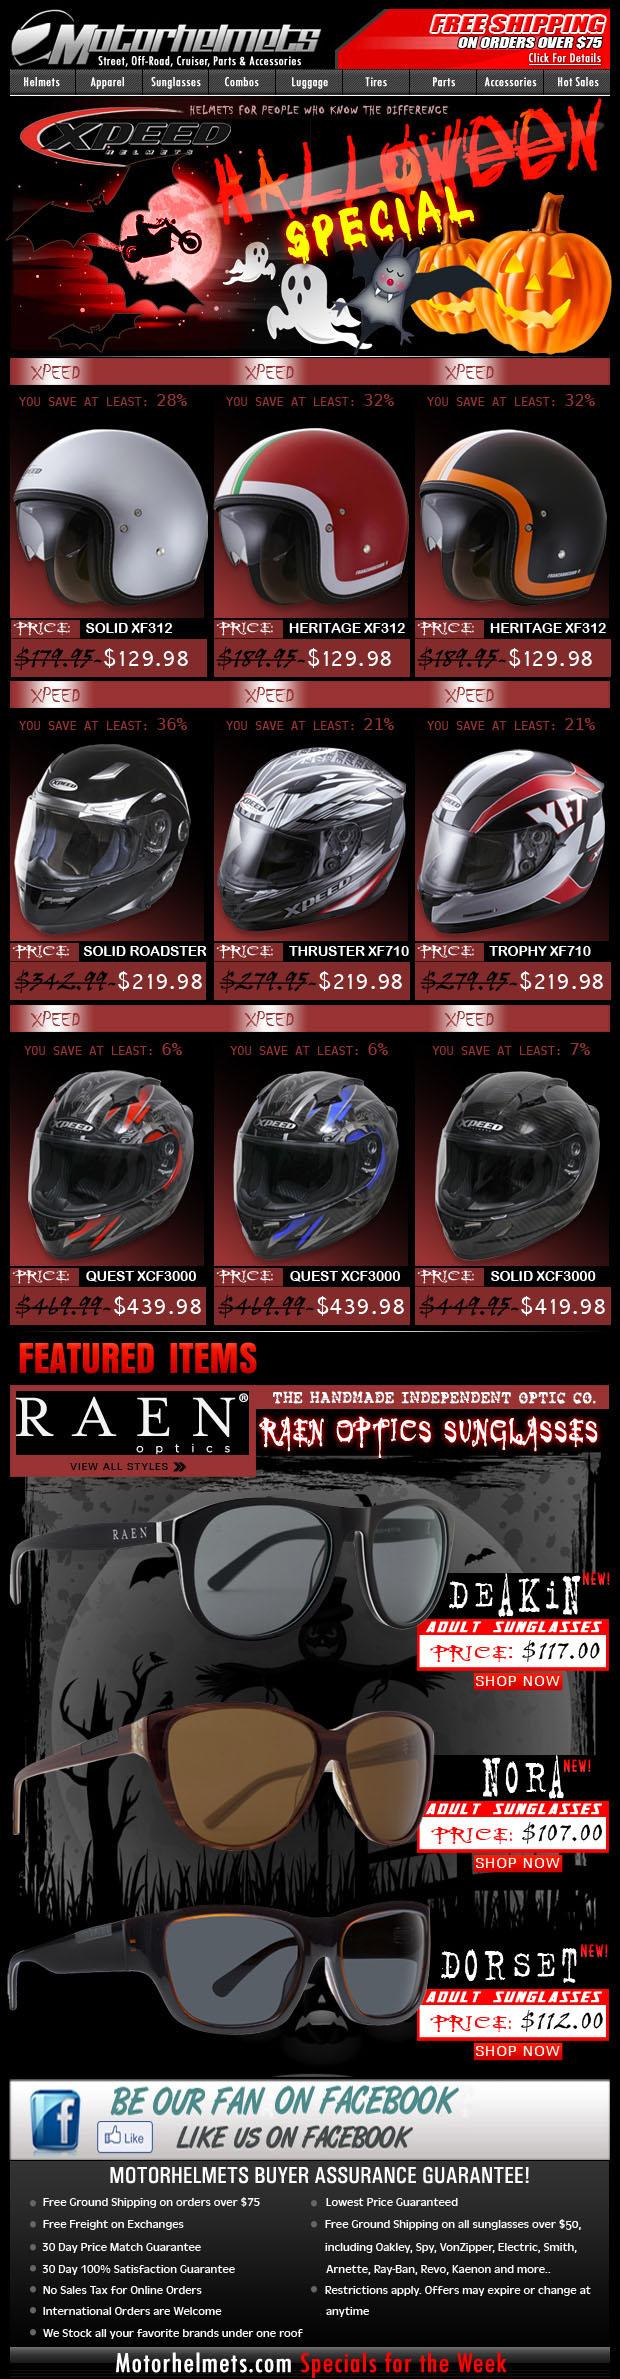 Halloween SALE! Up to 36% Off on XPEED Helmets...